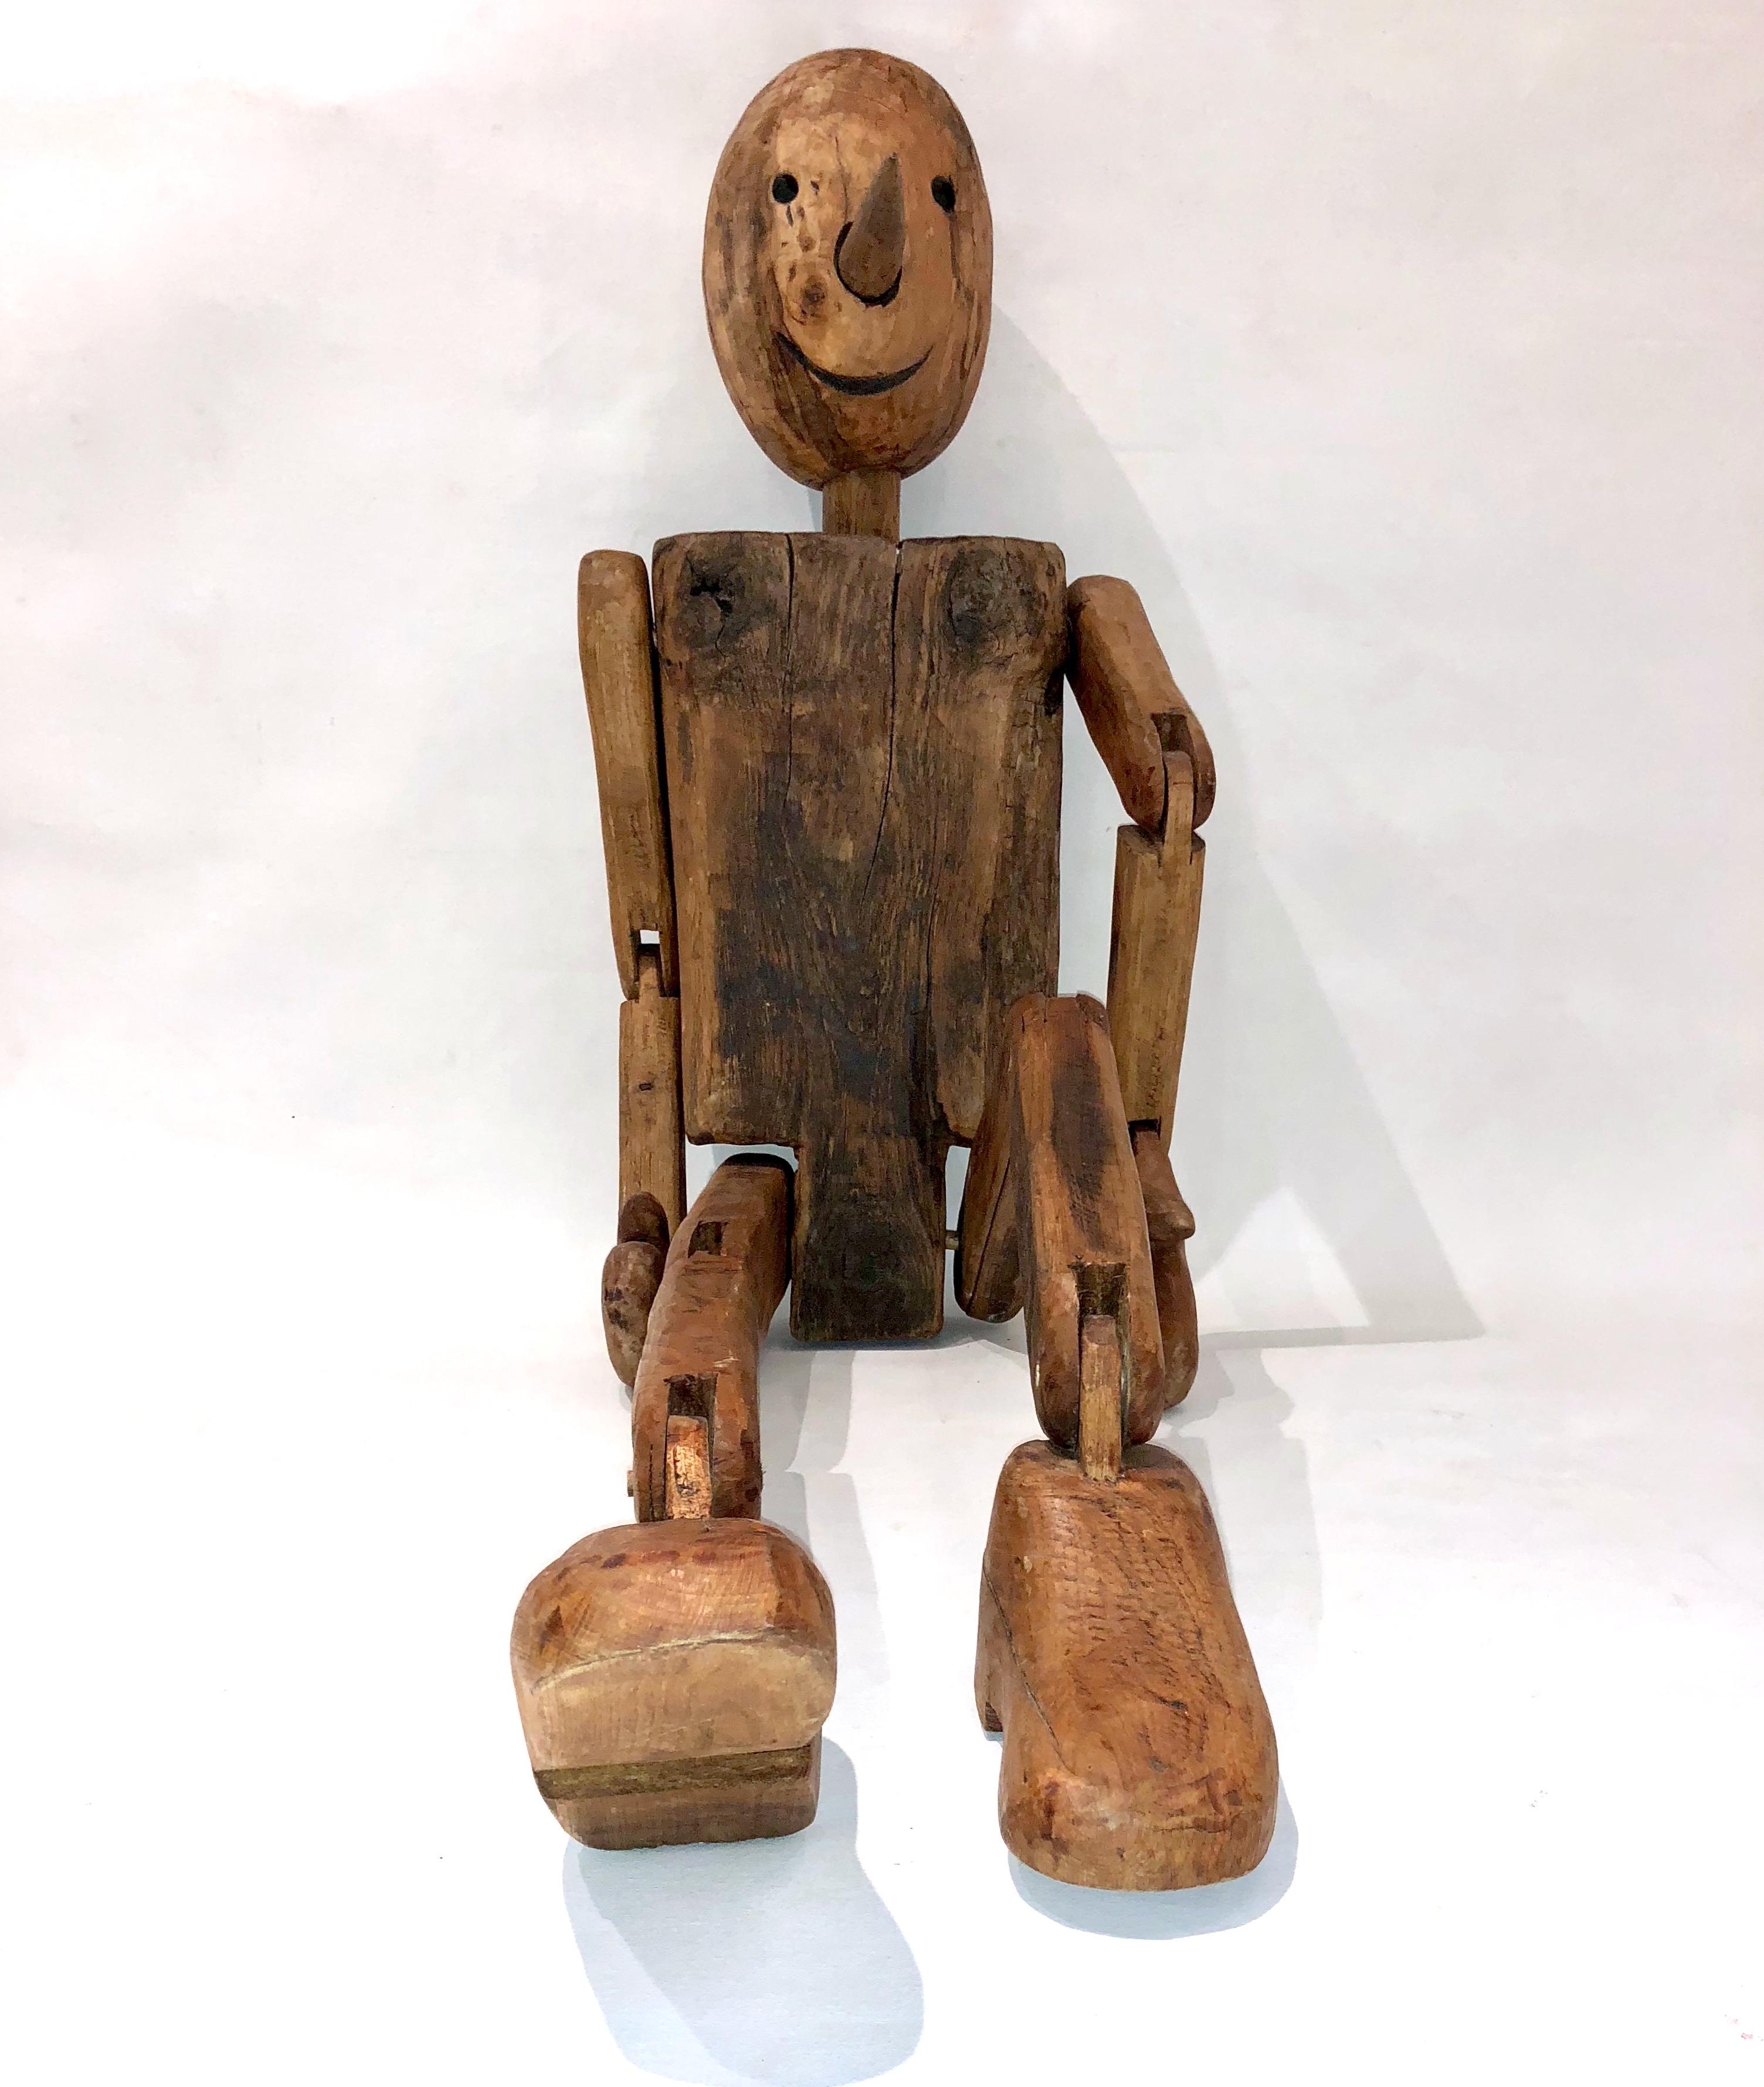 A mid-20th century life-sized Pinocchio modern Folk Art sculpture found in Tuscany, Italy, hand carved in Italian walnut and oak, high quality of the organic execution with articulated arms, hands, legs and feet, rare fun and expressive Work of Art.